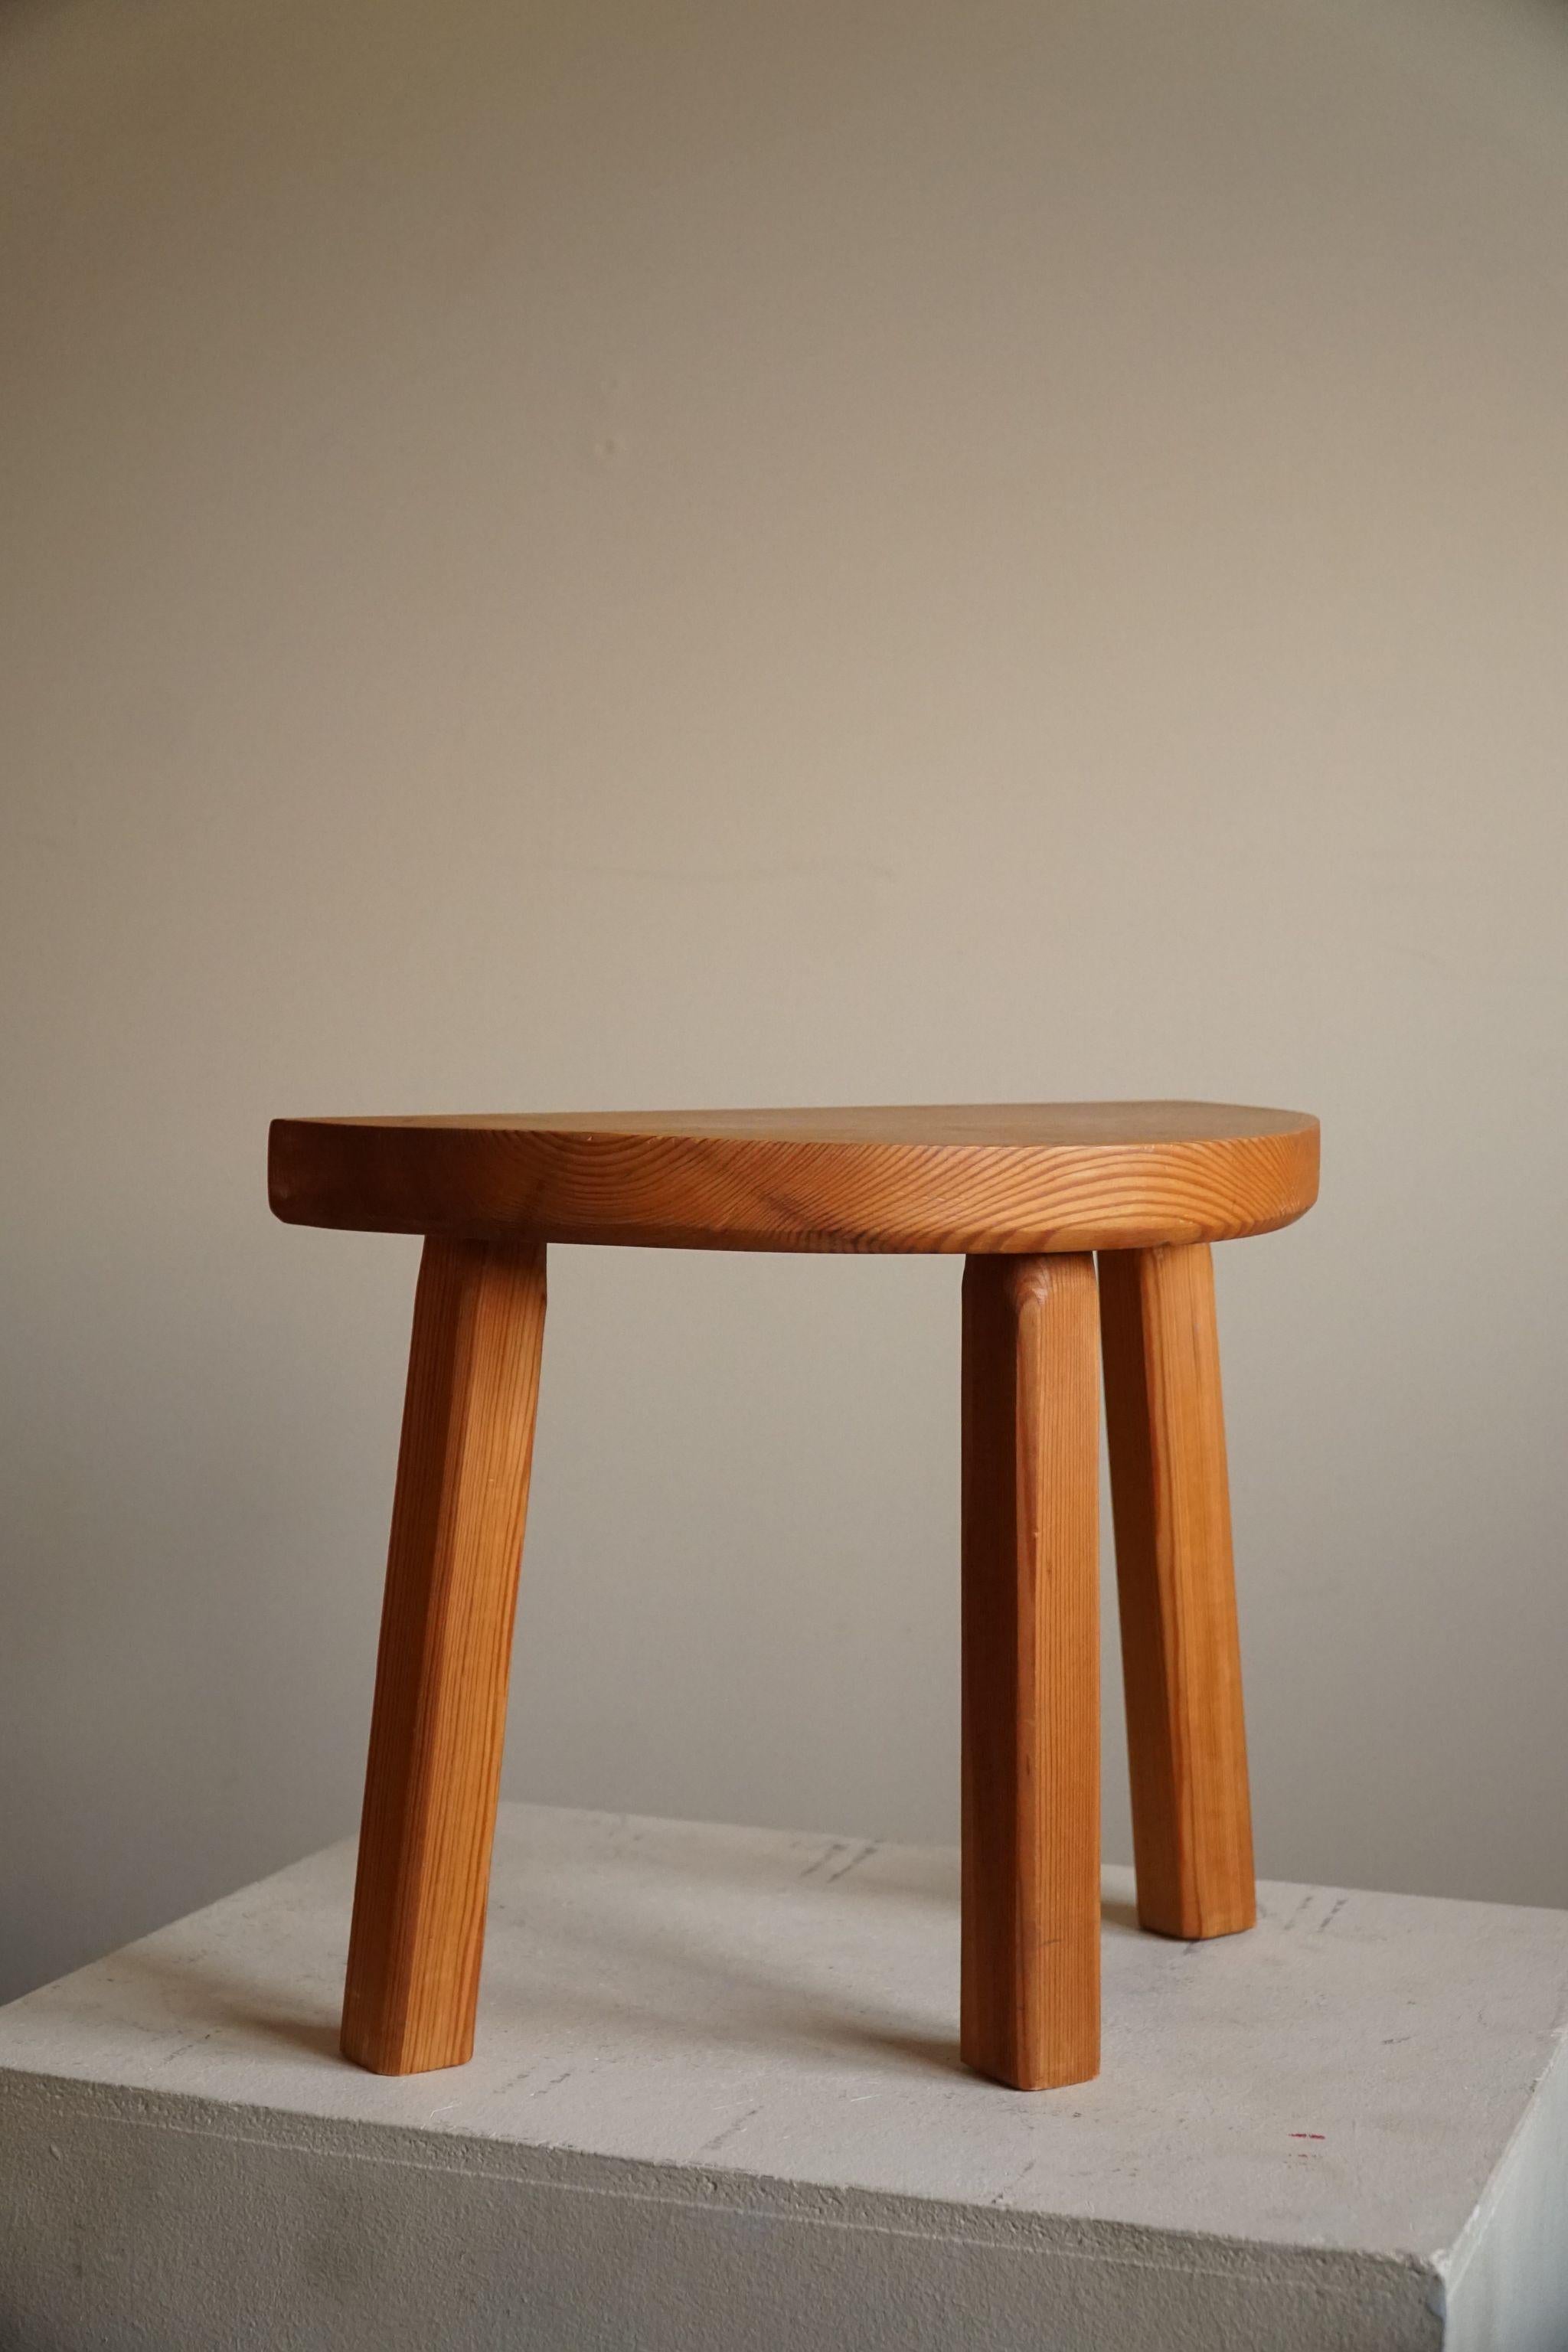 Vintage Scandinavian Modern solid pine tripod stool, mid century, ca 1970s.

General good vintage condition. A organic sculptural design, perfect match for the modern interior.